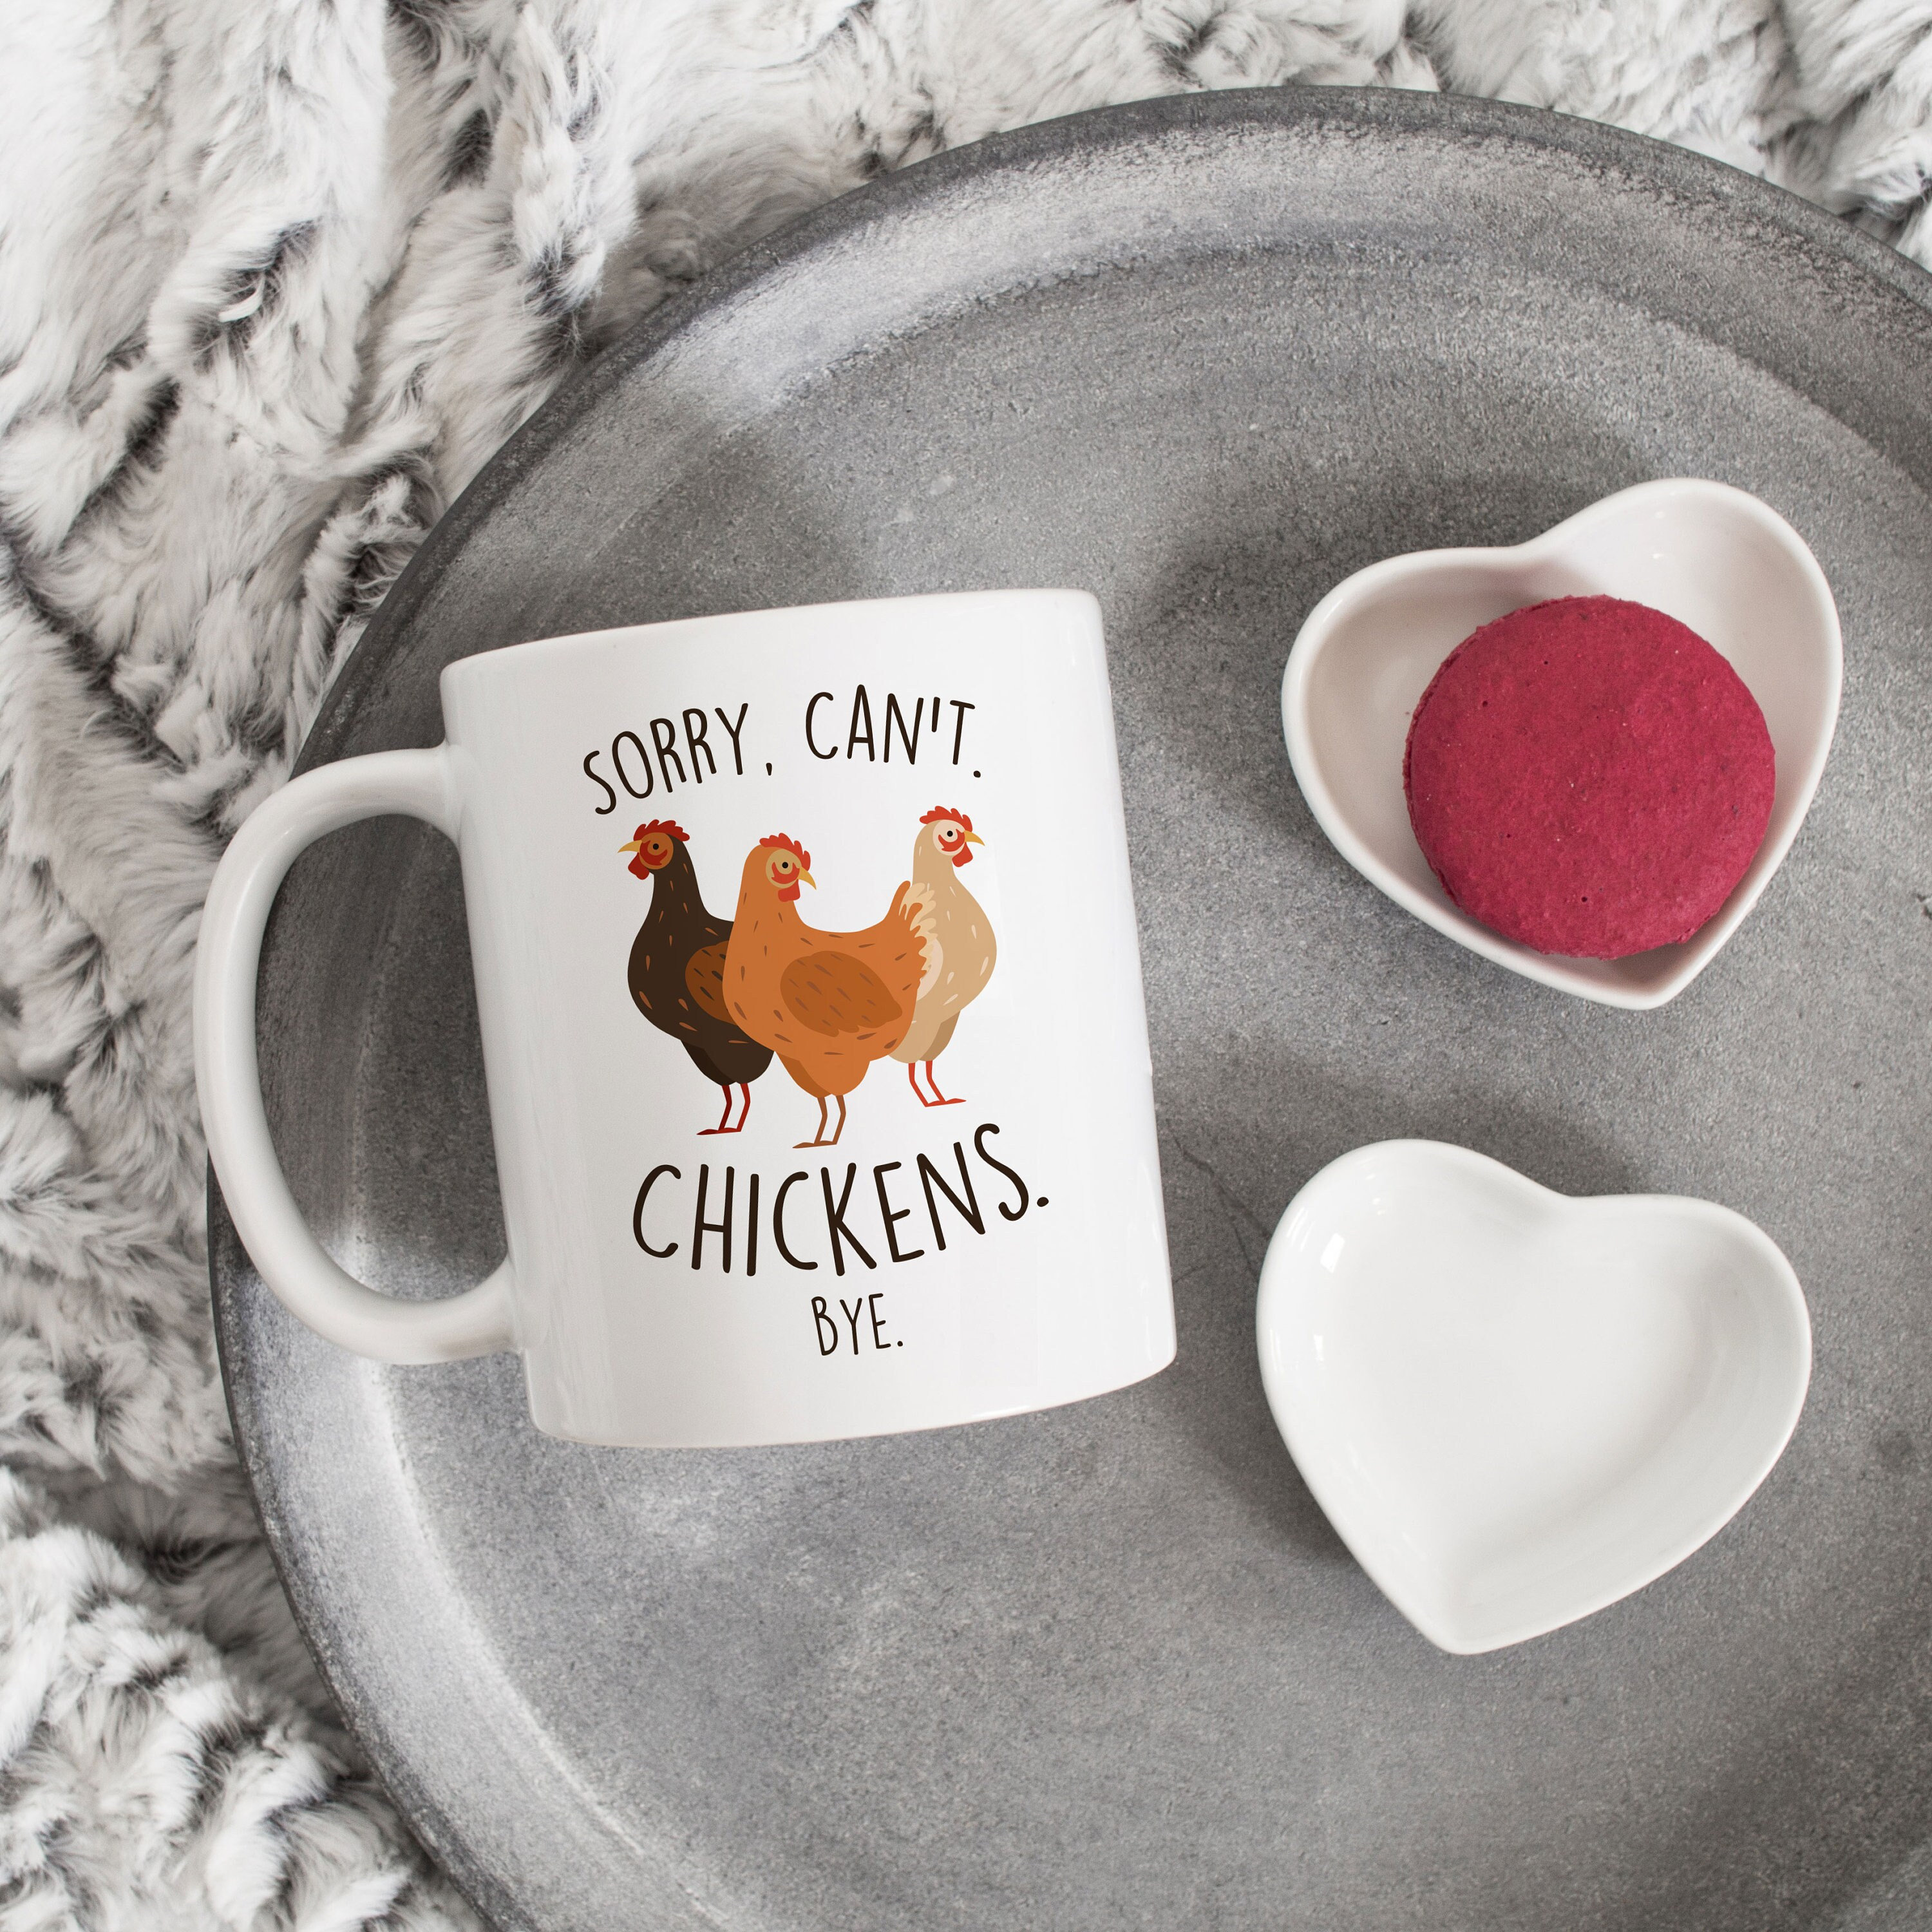 Chickens Coffee Mug, Chickens Gifts, Chicken Lover Gifts for Women, Chicken Accessories for Chicken lovers, Funny Chicken Gifts, Chicken Stuff